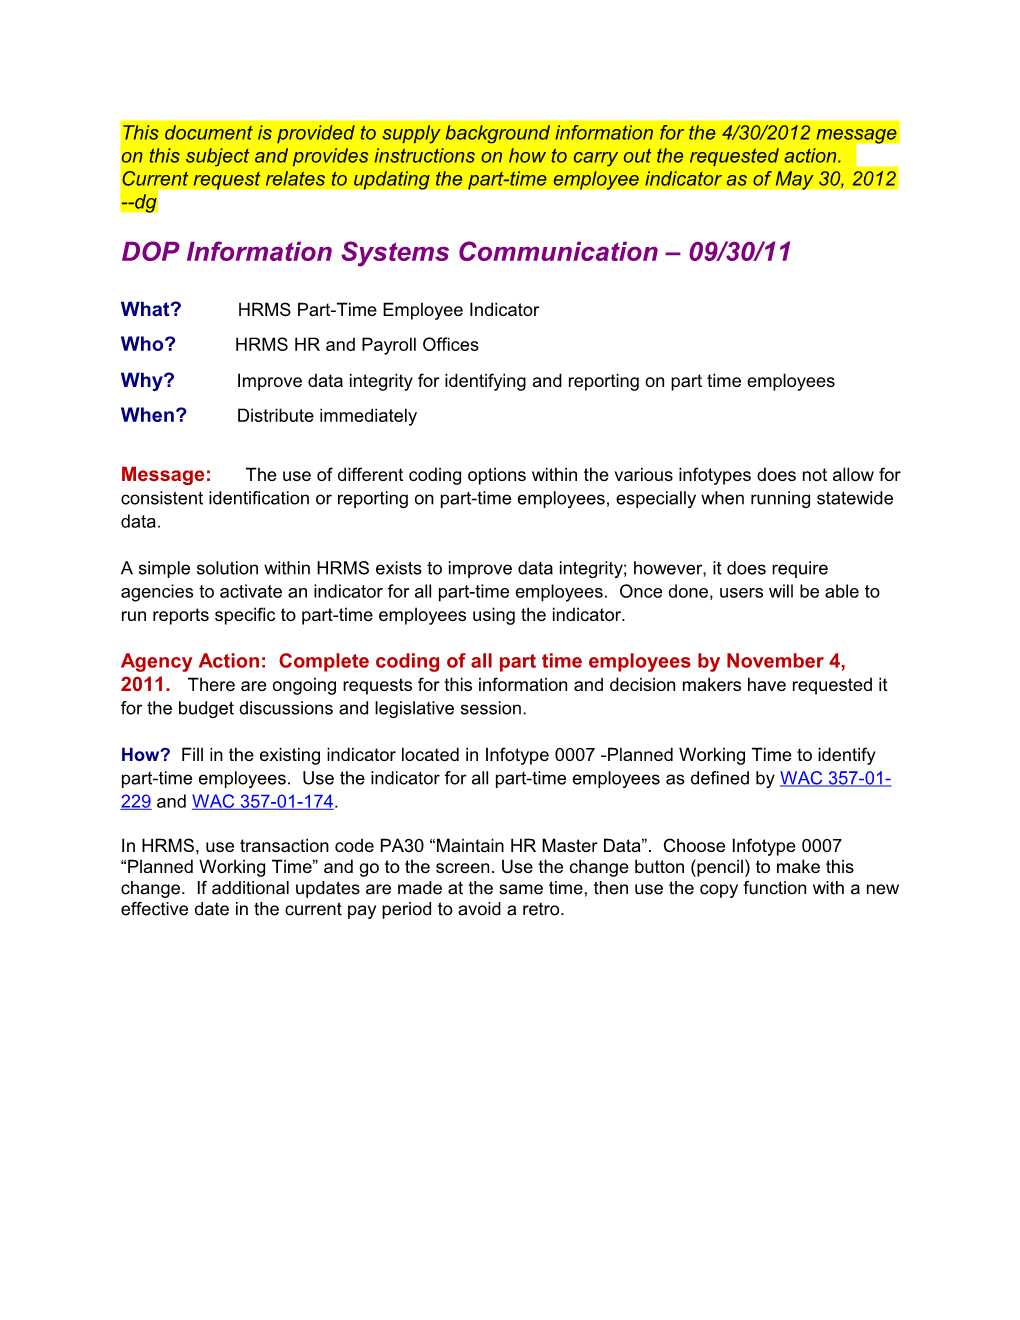 DOP Information Systems Communication 09/30/11